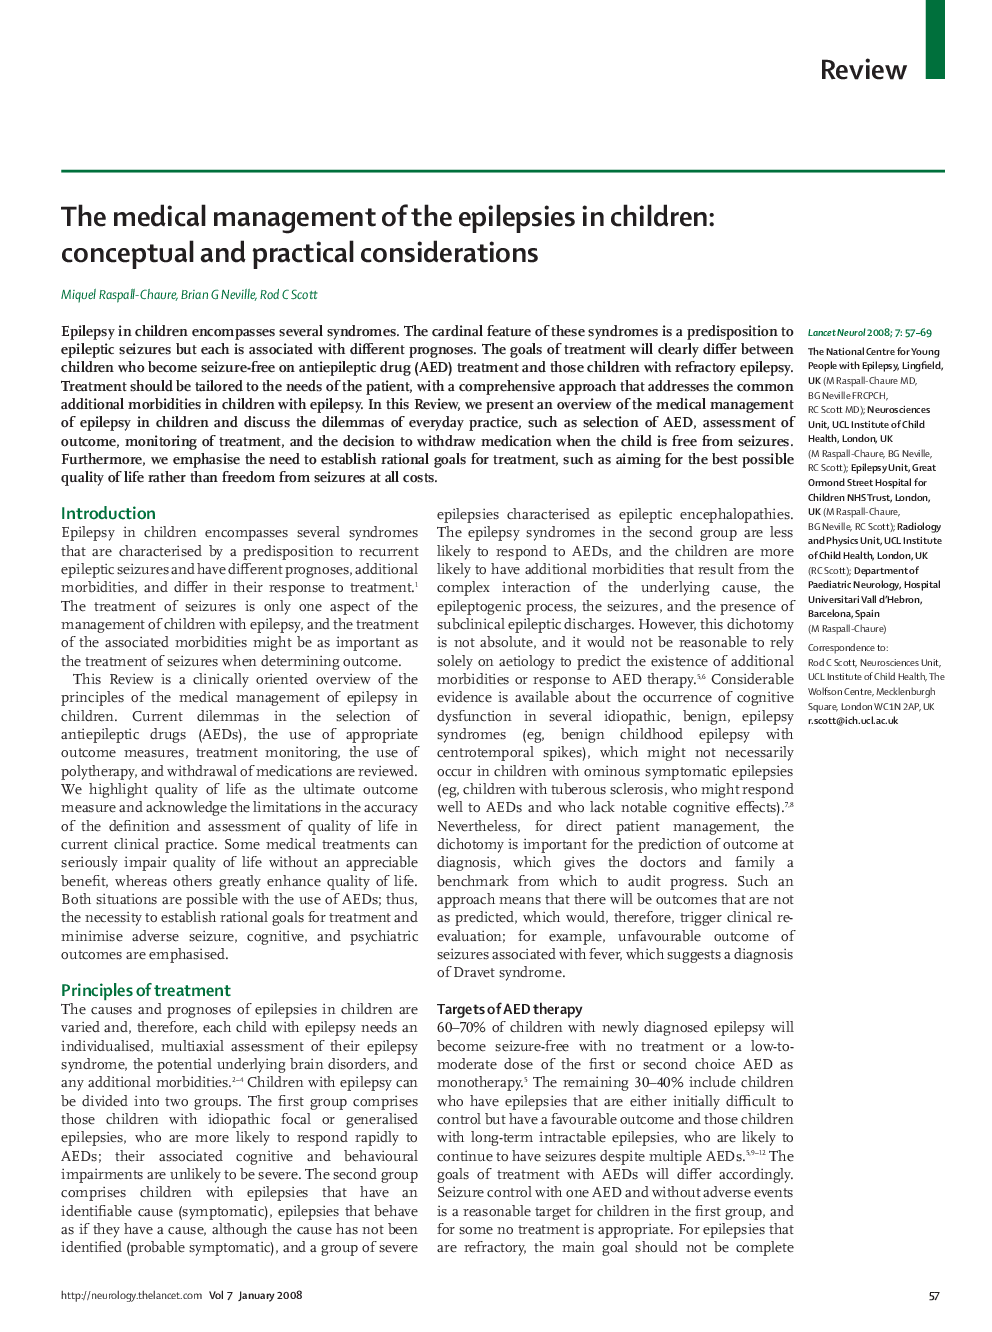 The medical management of the epilepsies in children: conceptual and practical considerations